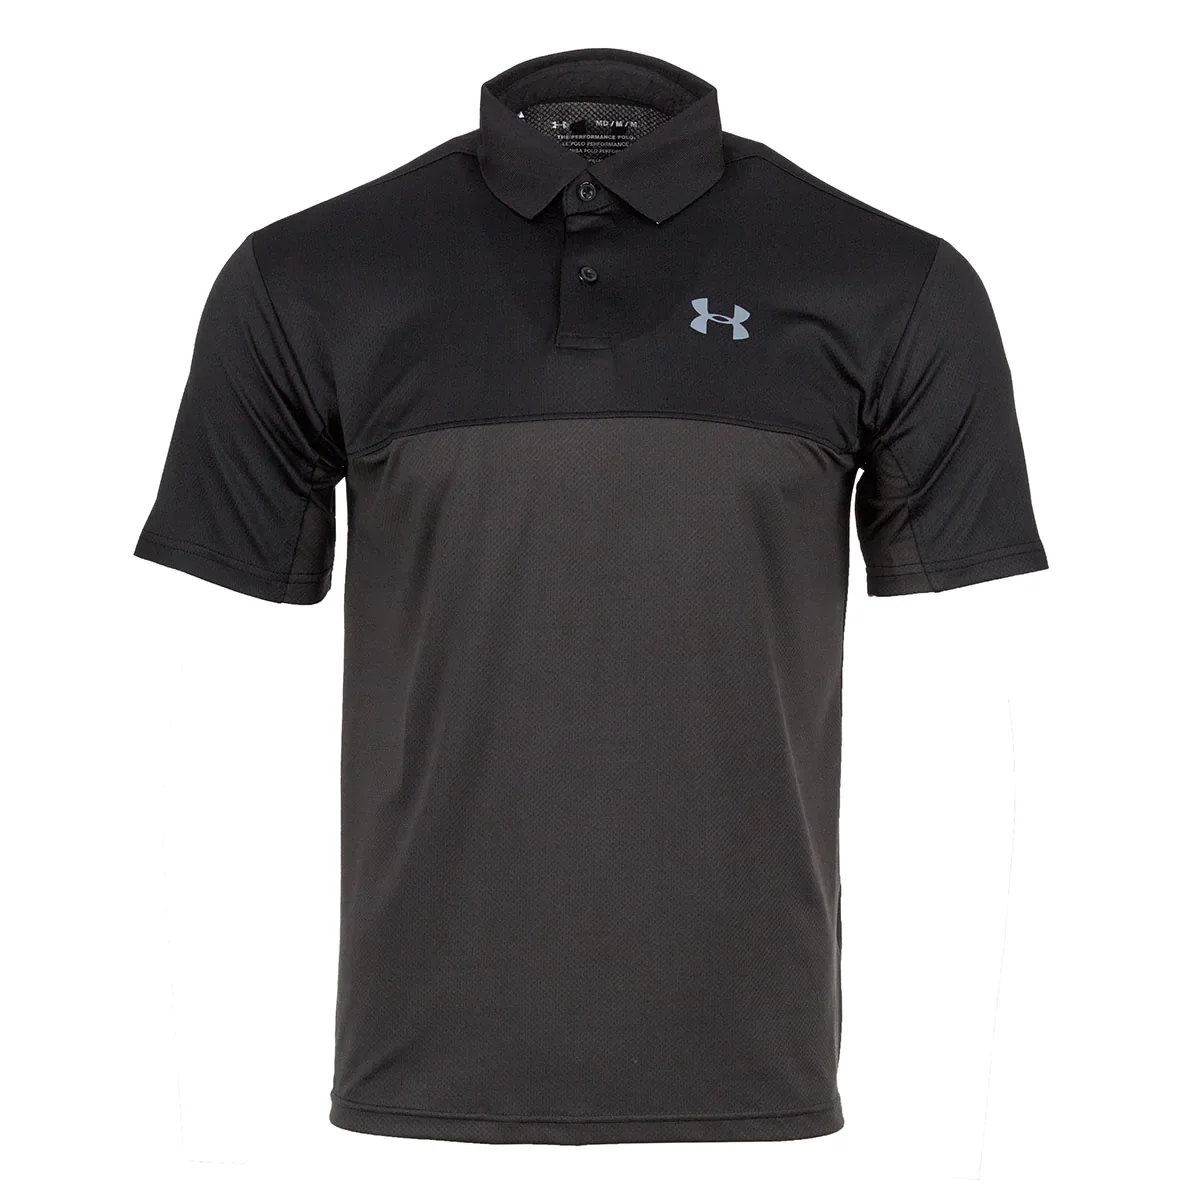 Image of Under Armour Men's Performance 2.0 Colorblock Polo